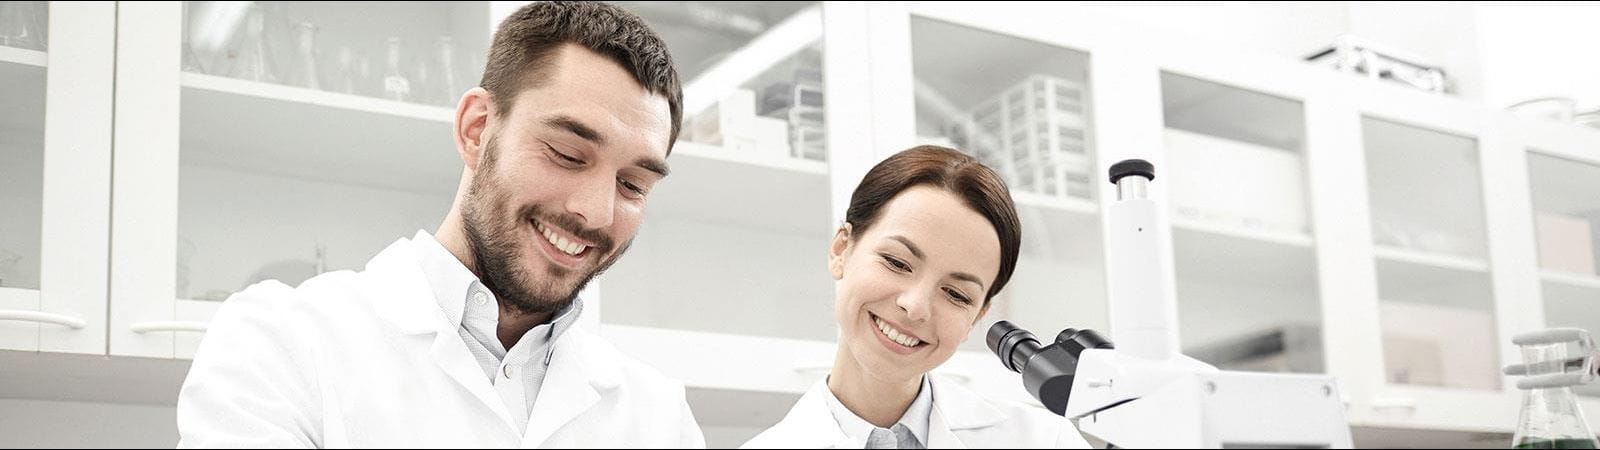 Male and female researchers in a lab taking notes